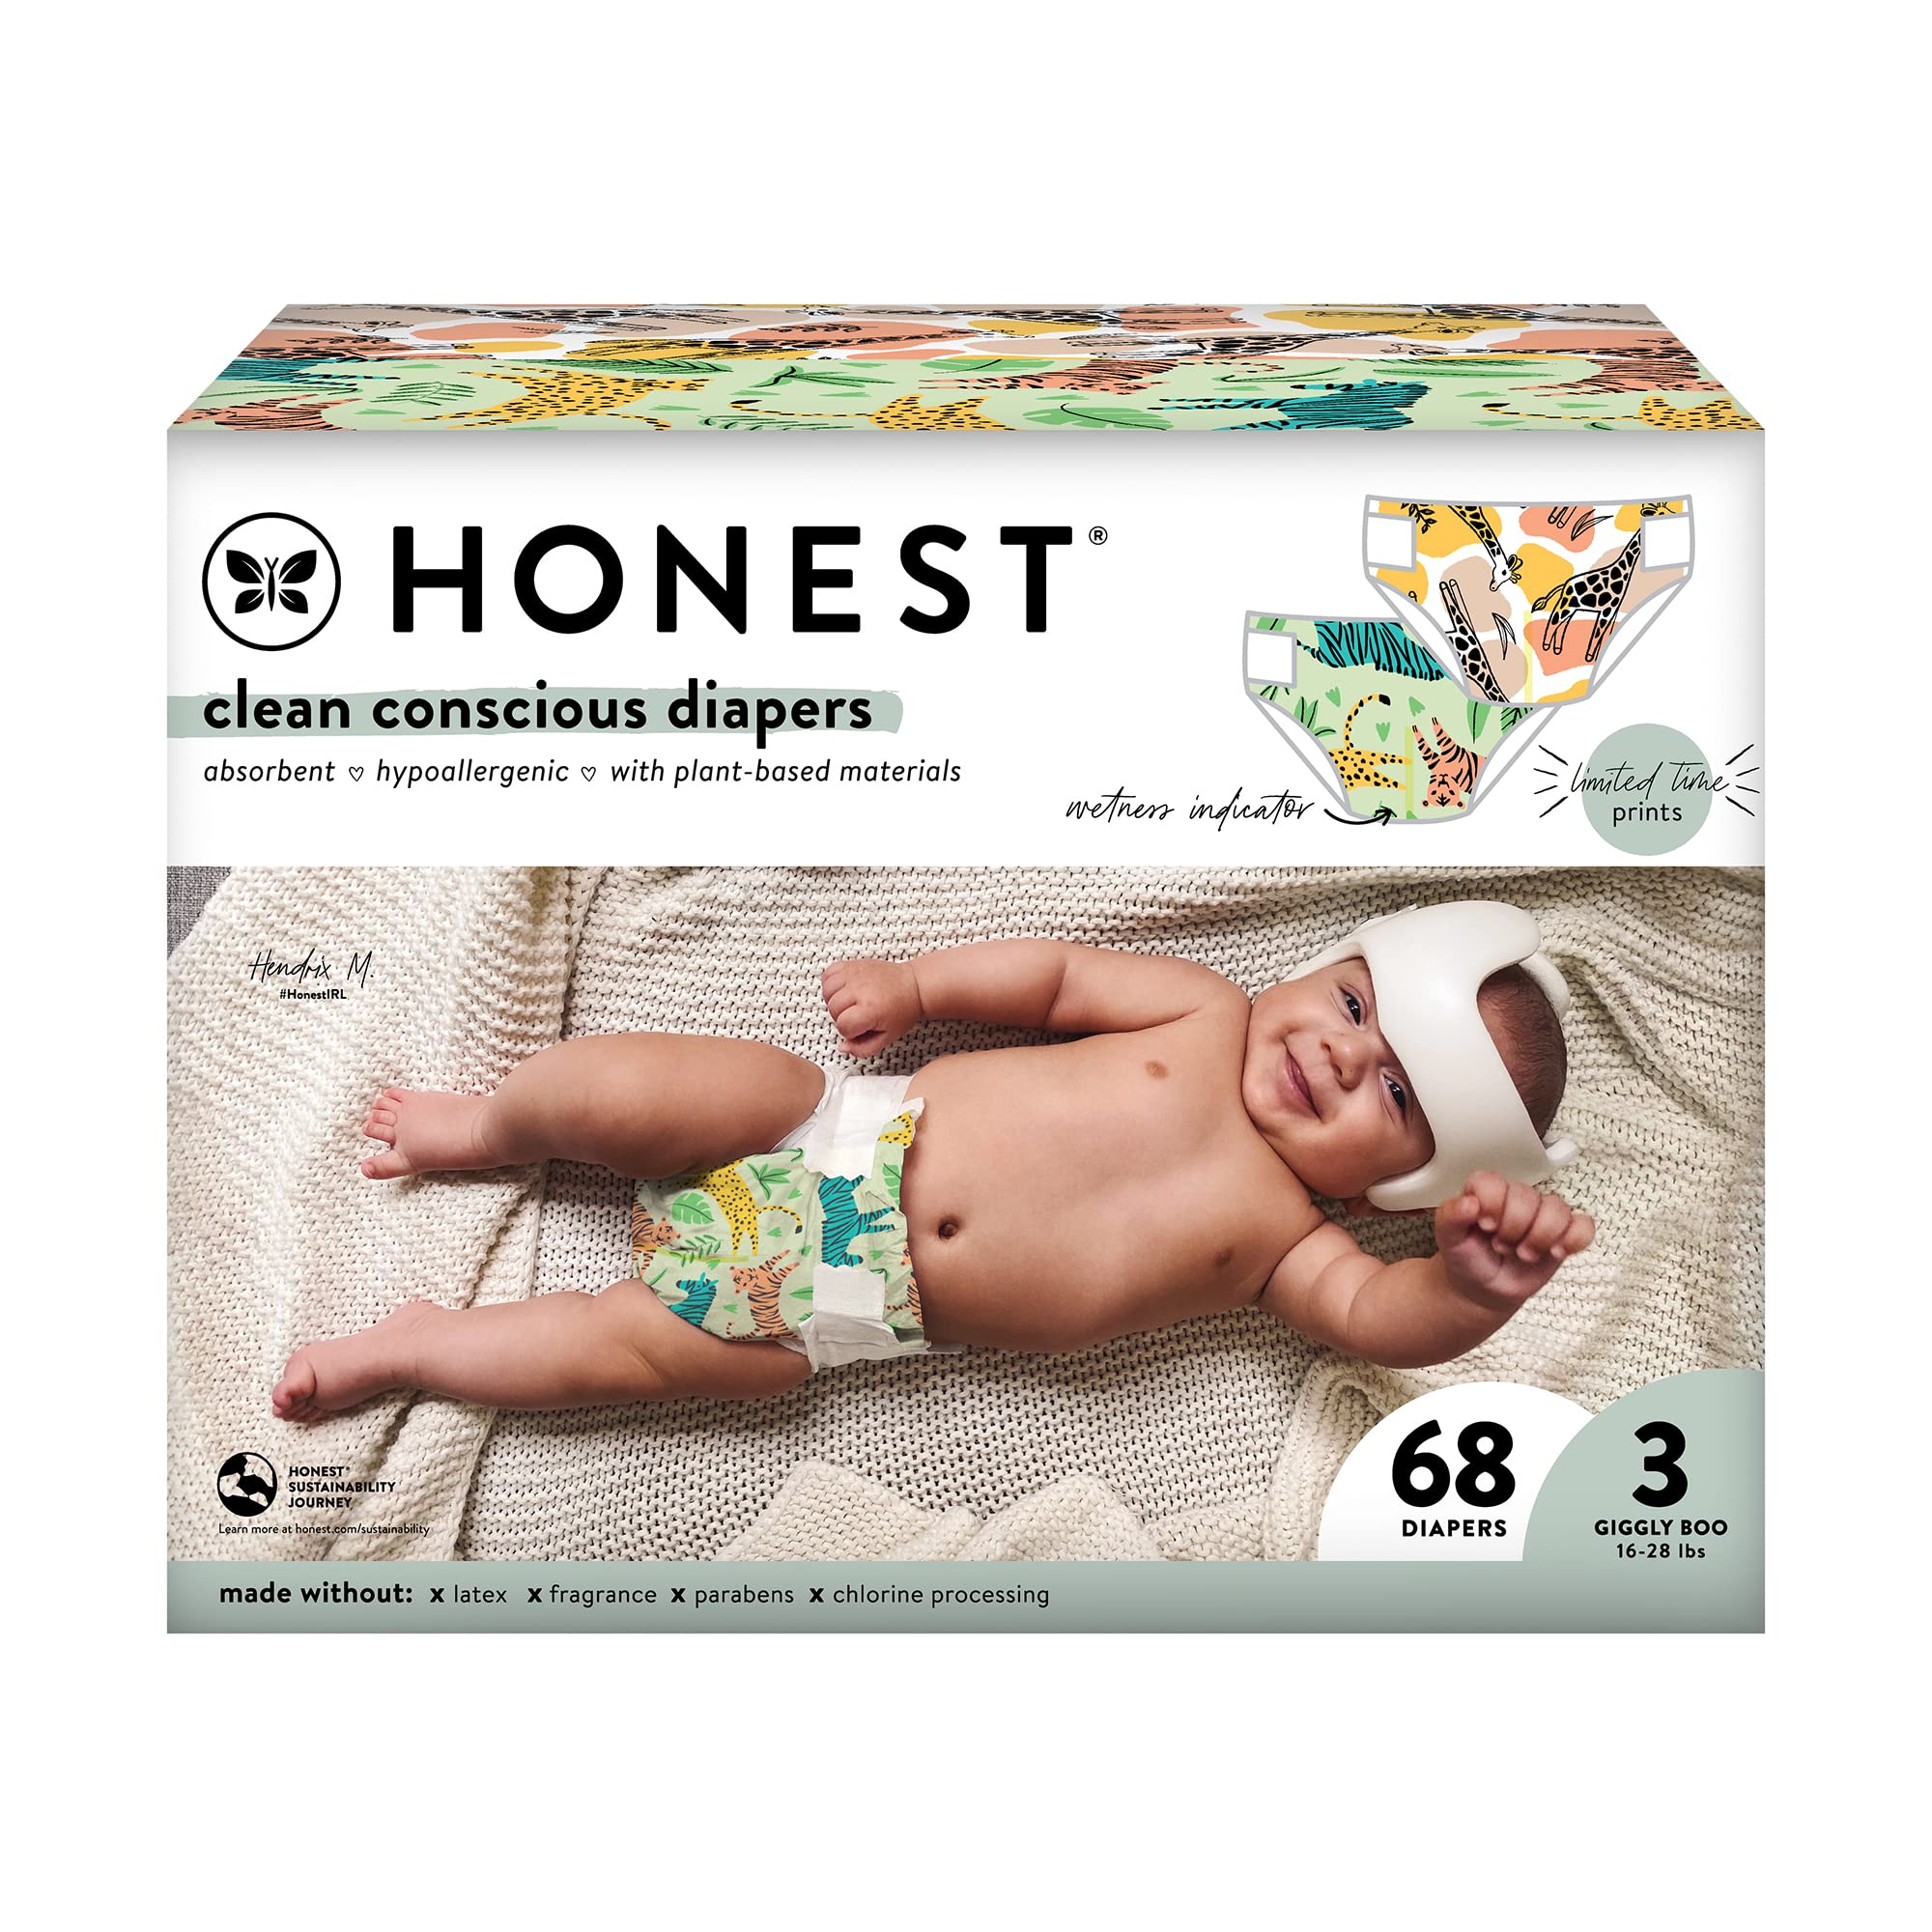 The Honest Company Clean Conscious Diapers | Plant-Based, Sustainable | Stripe Safari & Seeing Spots | Club Box, Size 3 (16-28 lbs), 68 Count